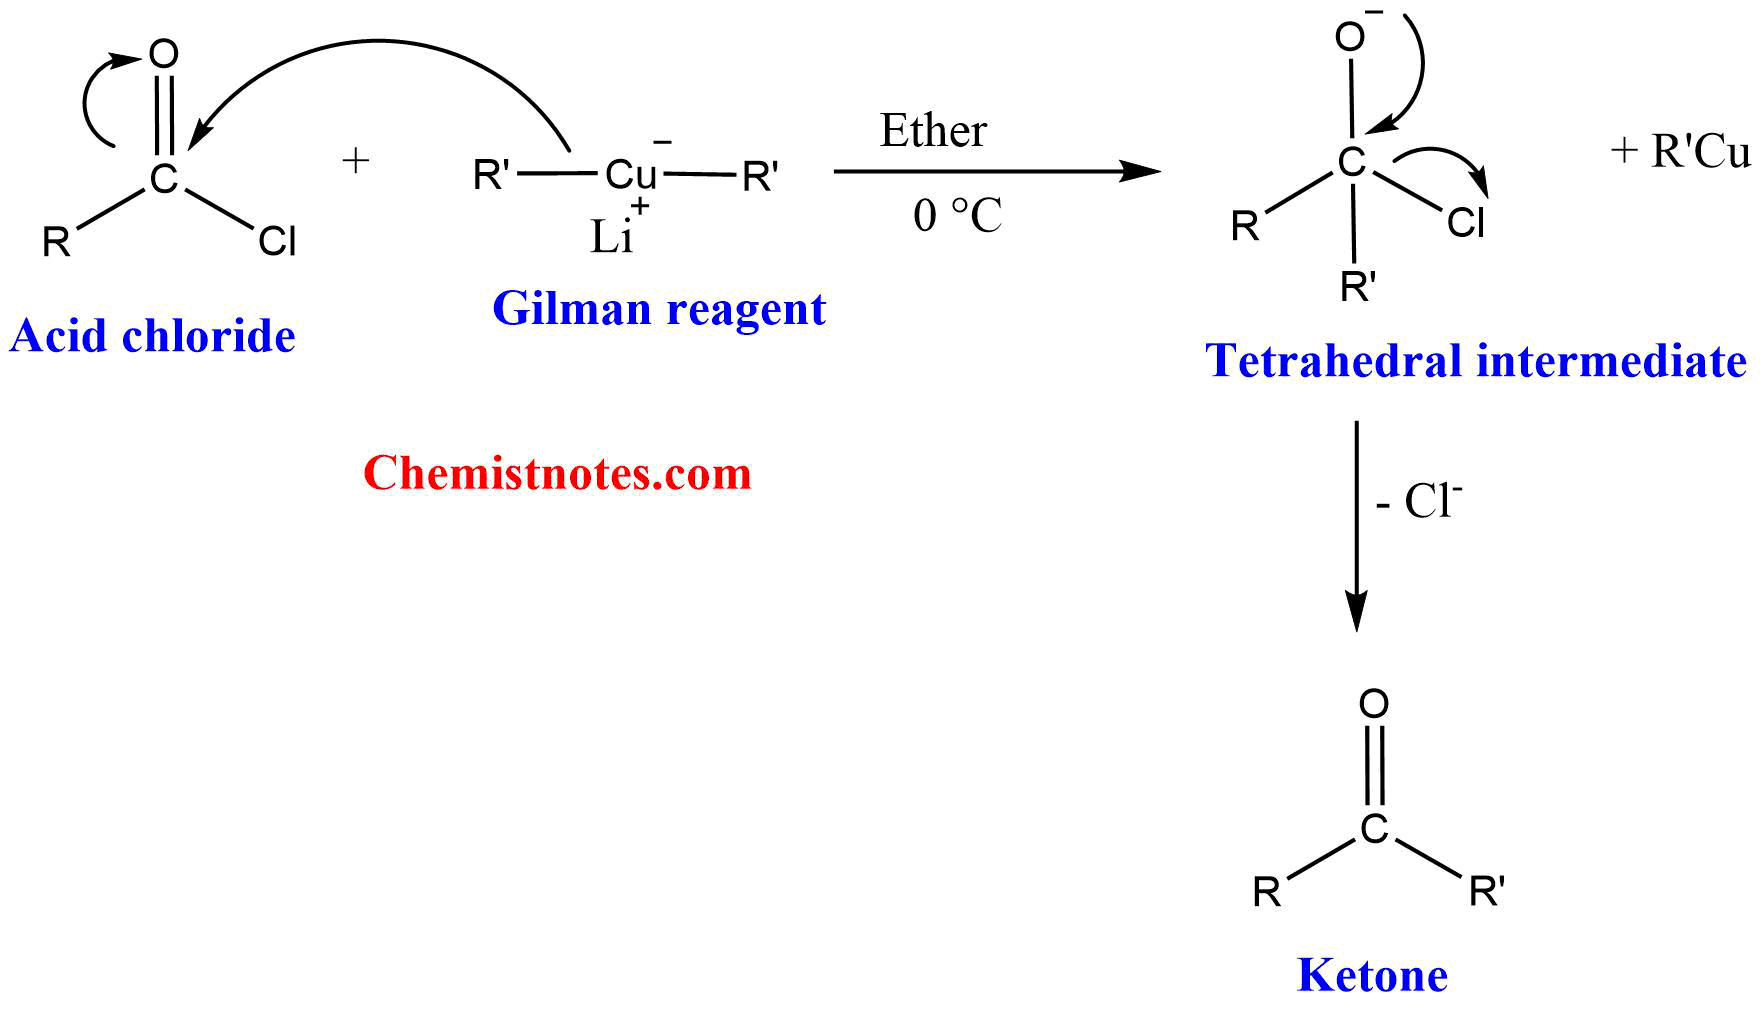 Mechanism of Gilman reagent with acid chlorides